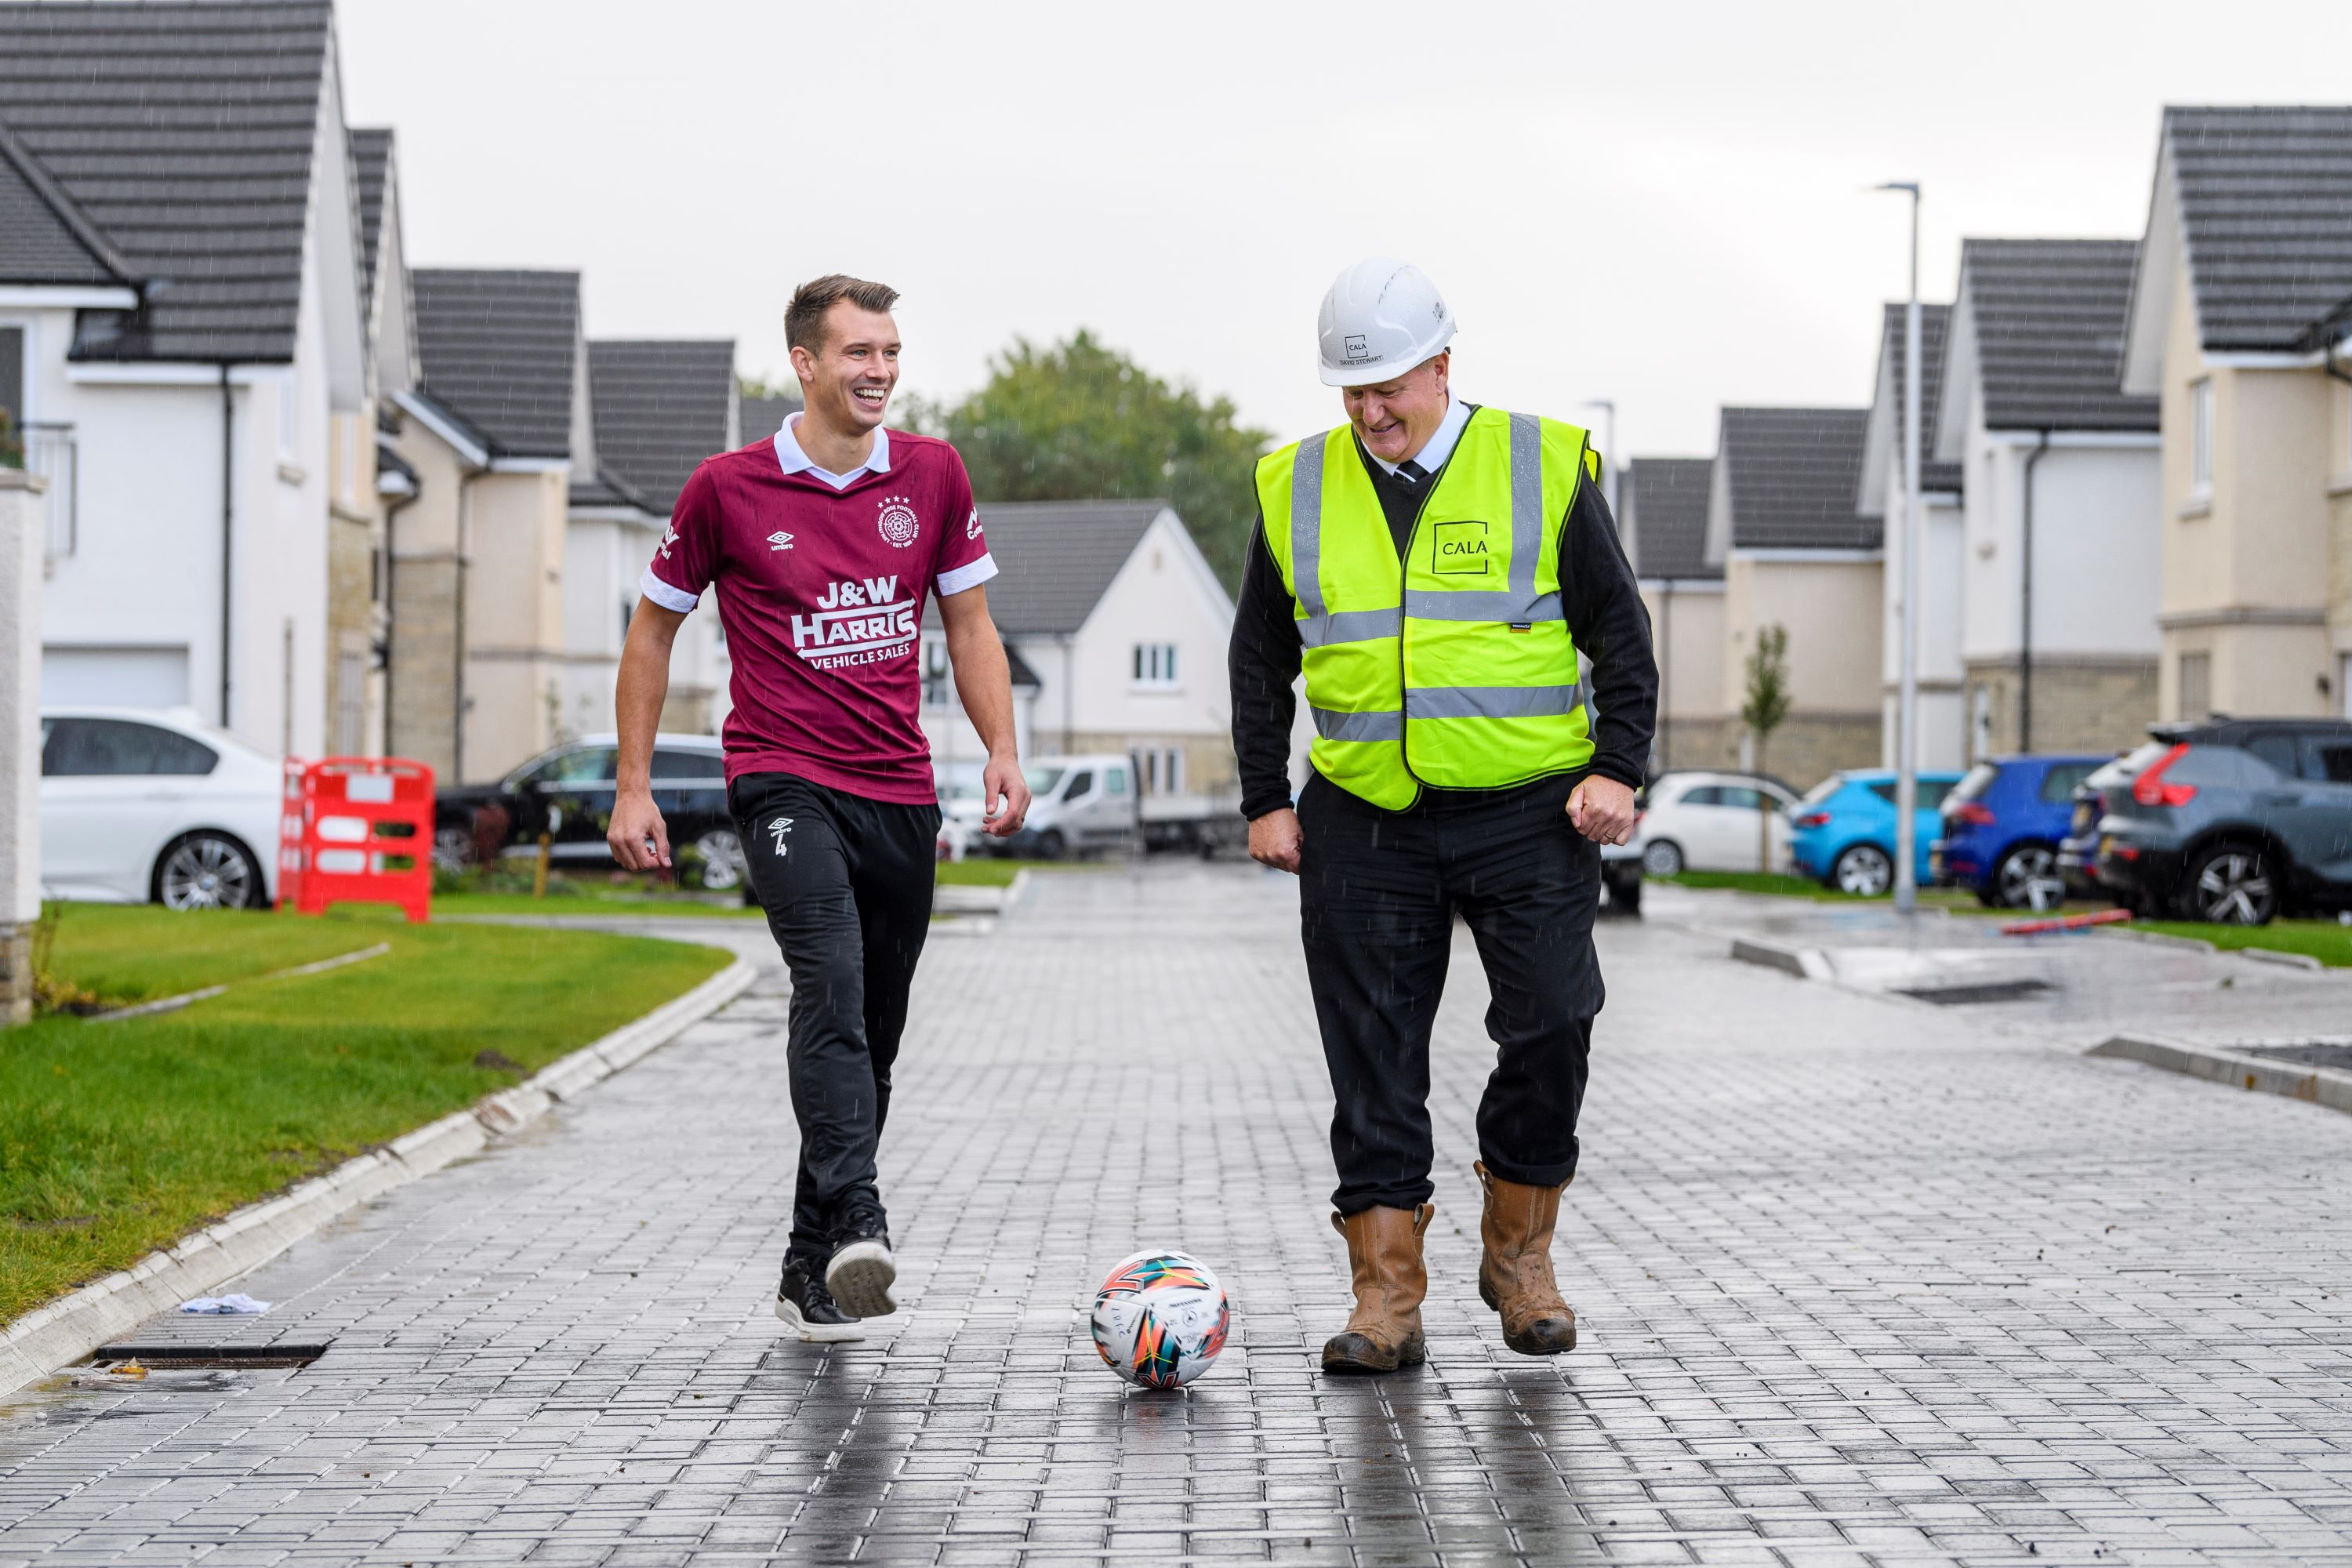 Cala sponsors Linlithgow Rose ahead of fourth local project